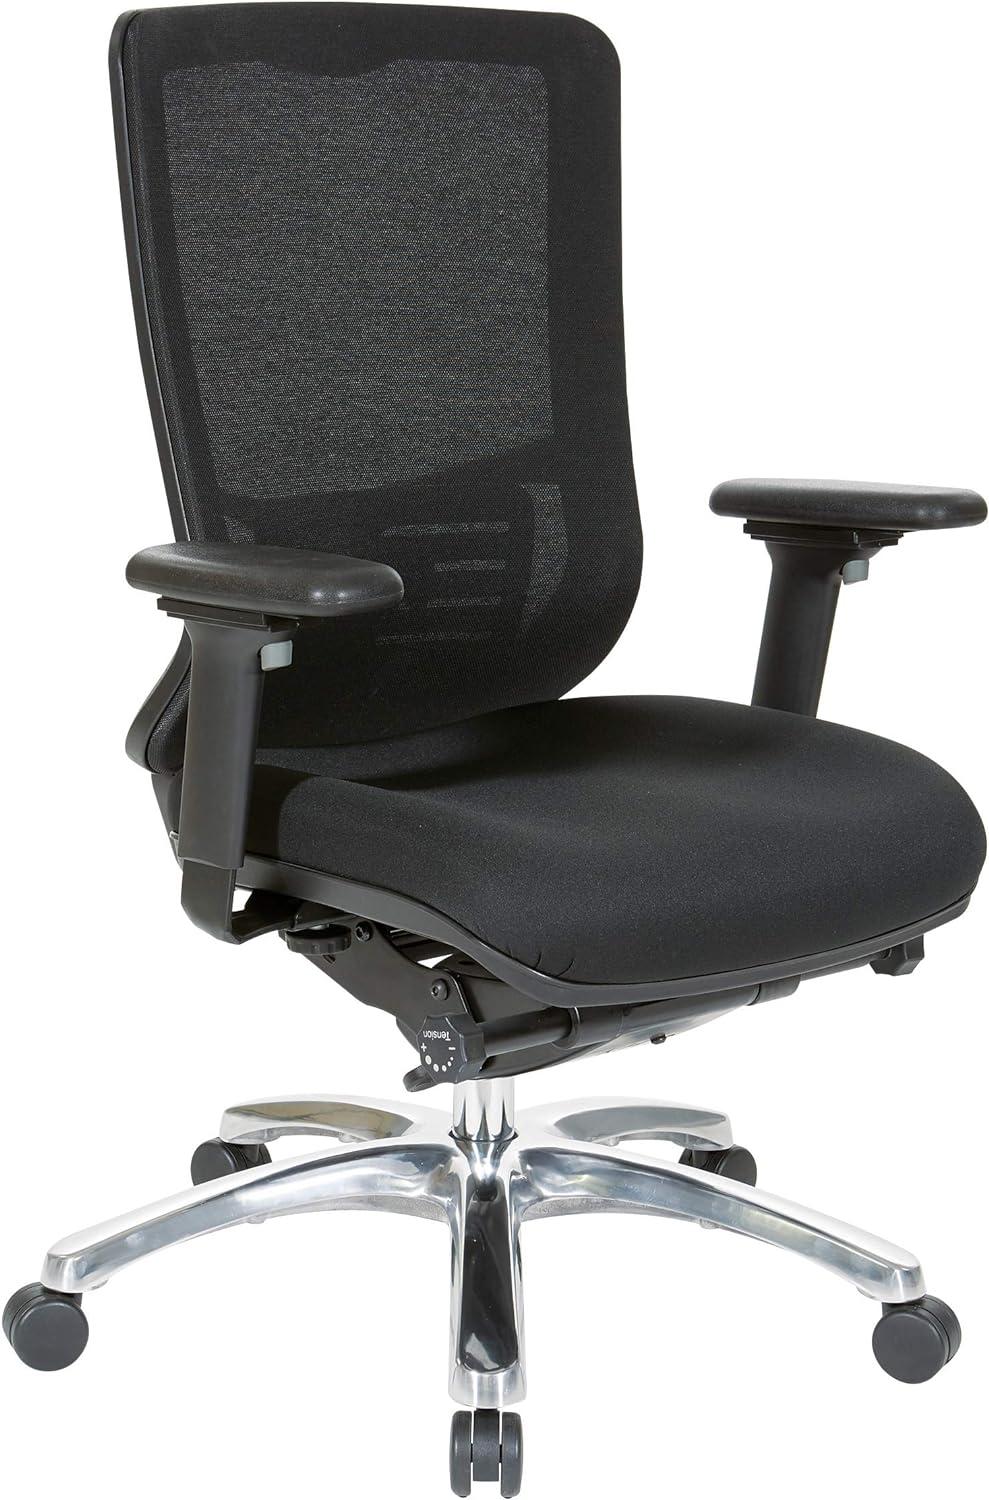 High Back ProGrid Mesh Executive Office Chair in Black